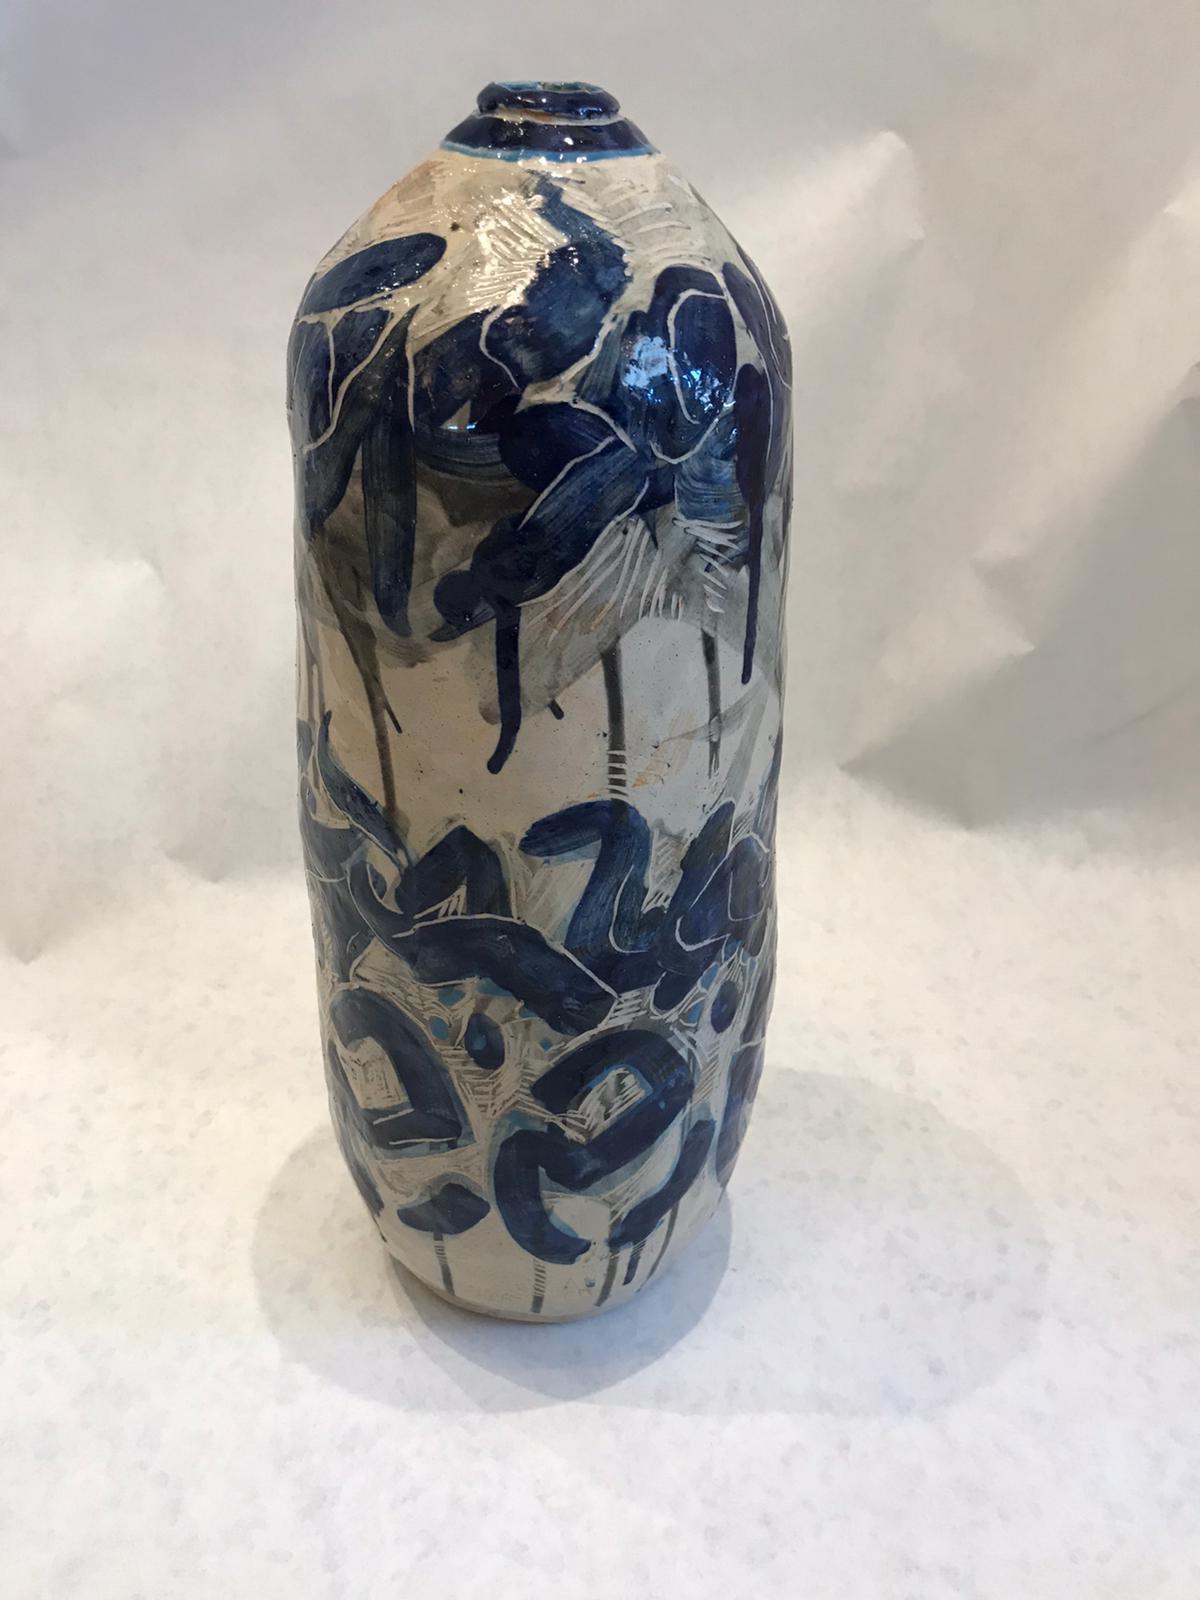 The beautiful abstract graphics vase in rich deep blues and grays. No marking but this vintage piece definitely has a look of Picasso!